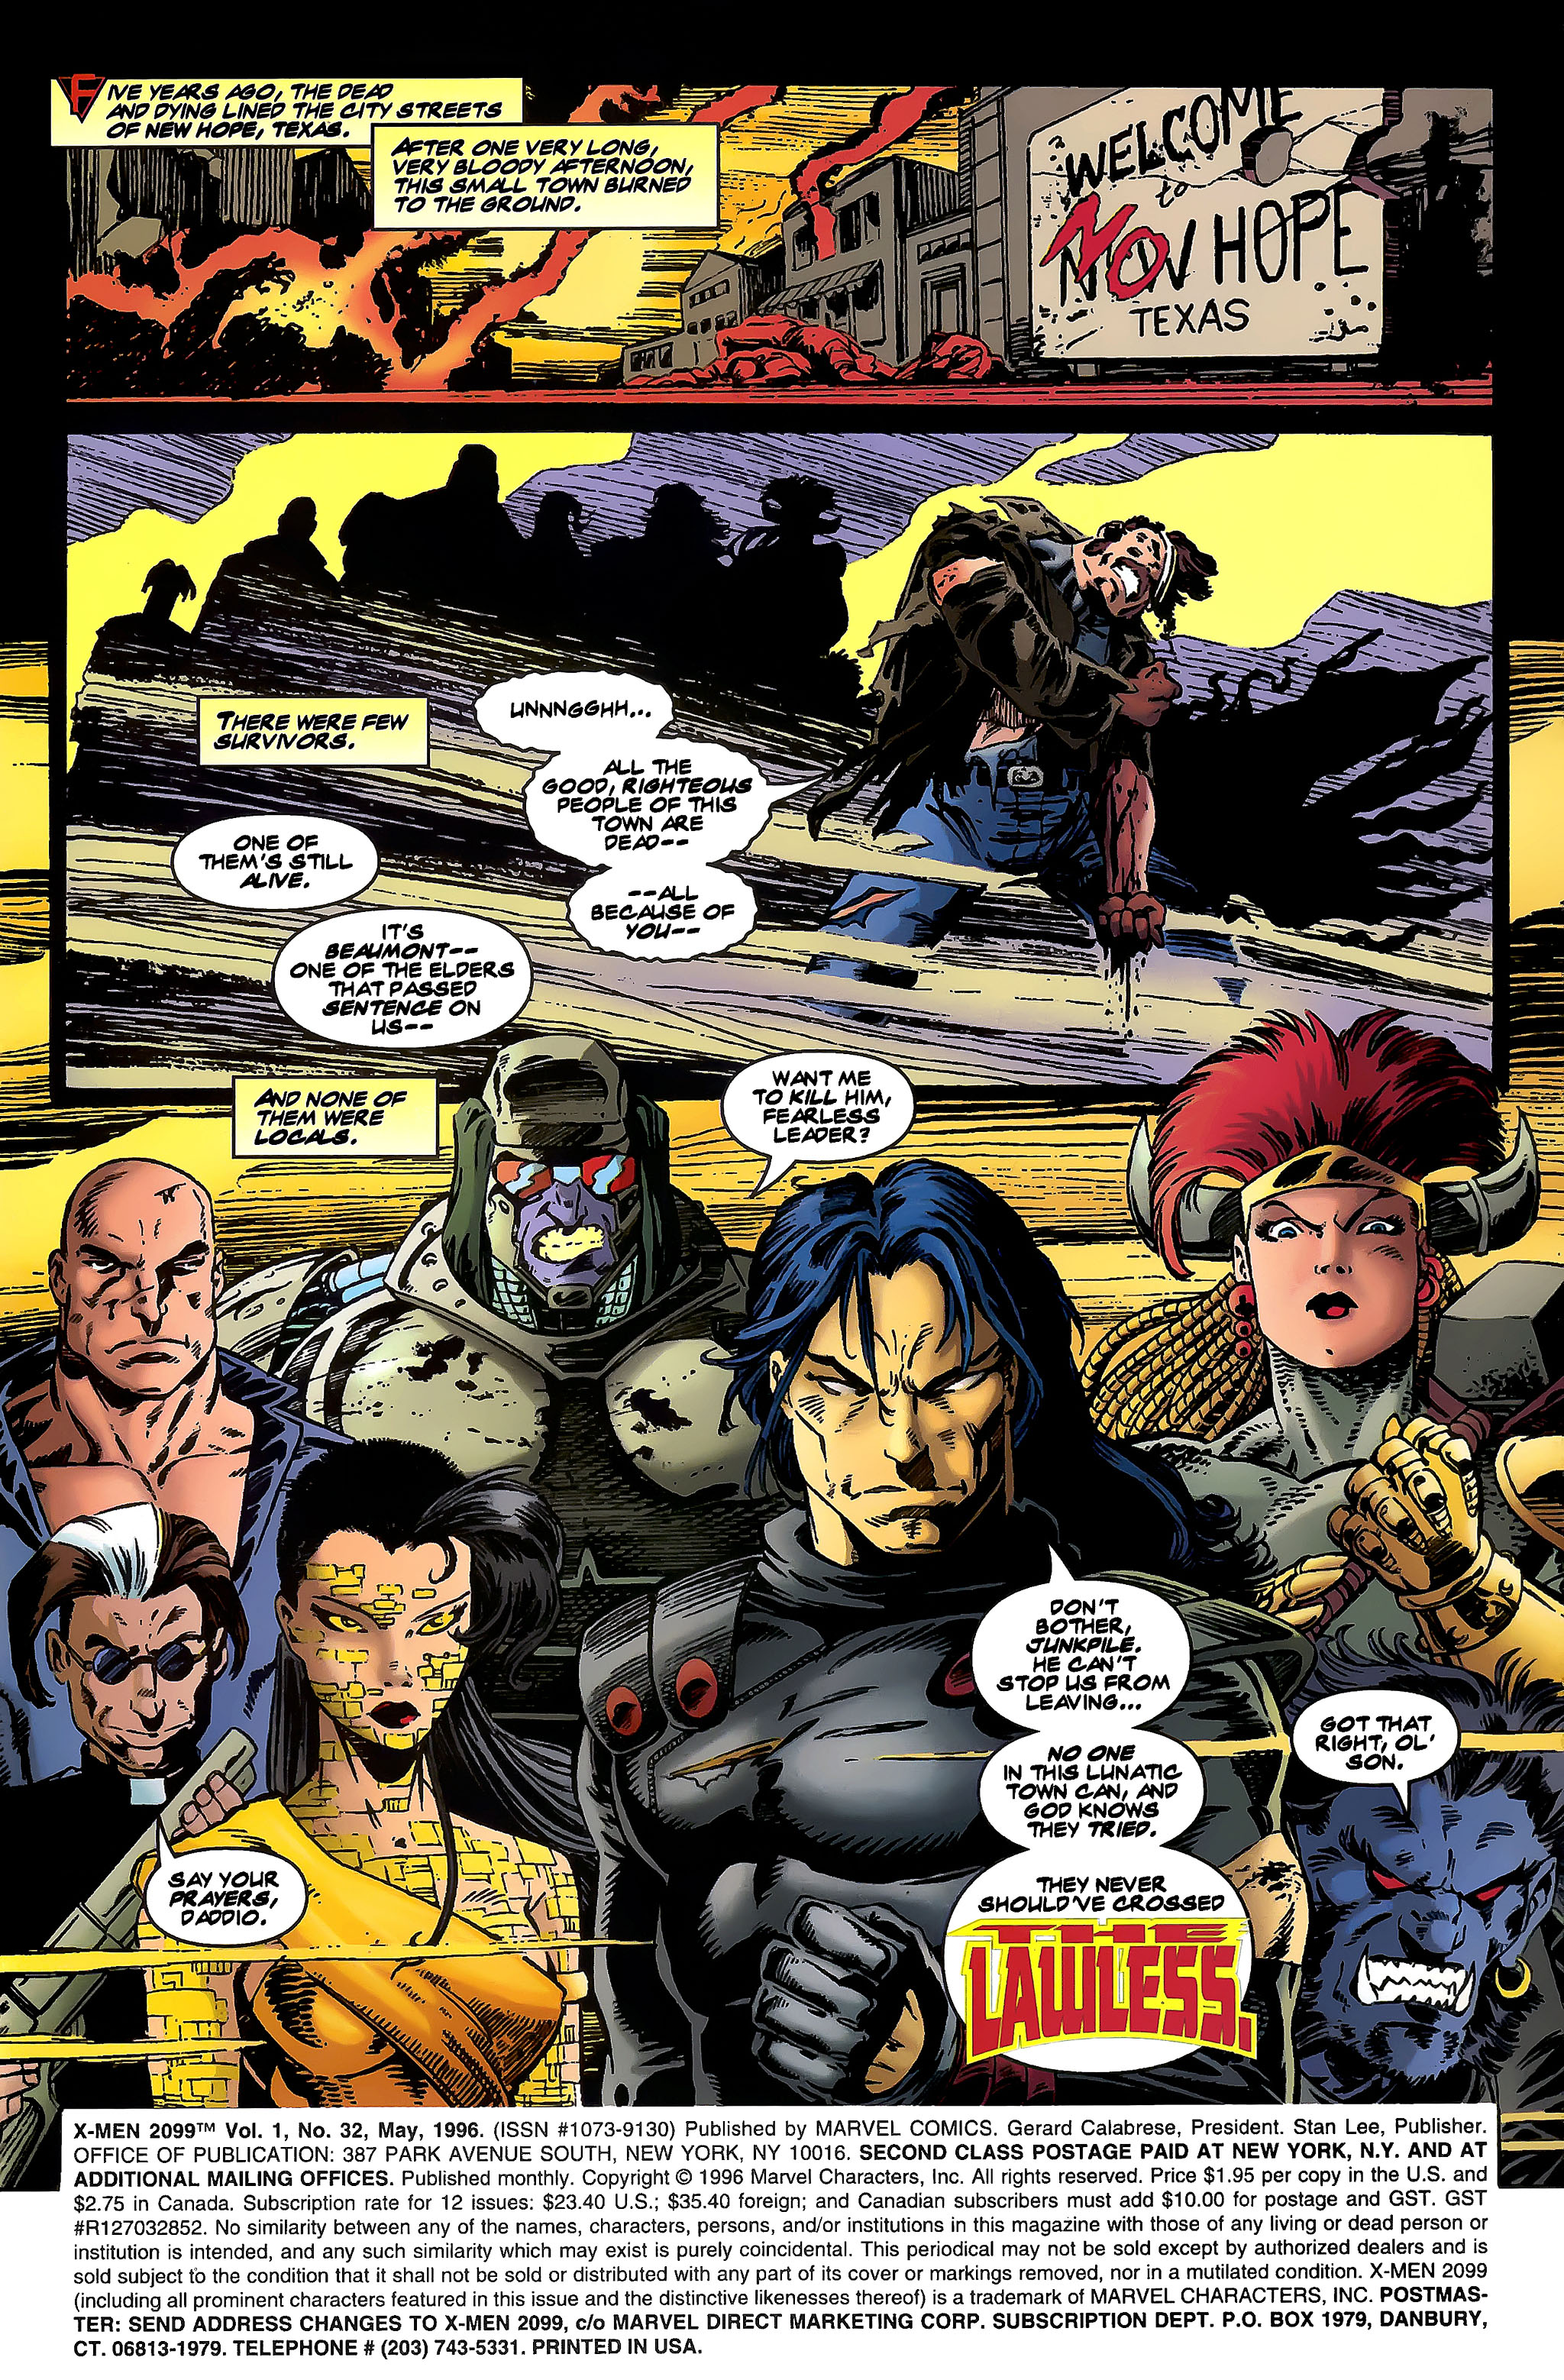 X Men 99 Issue 32 Viewcomic Reading Comics Online For Free 19